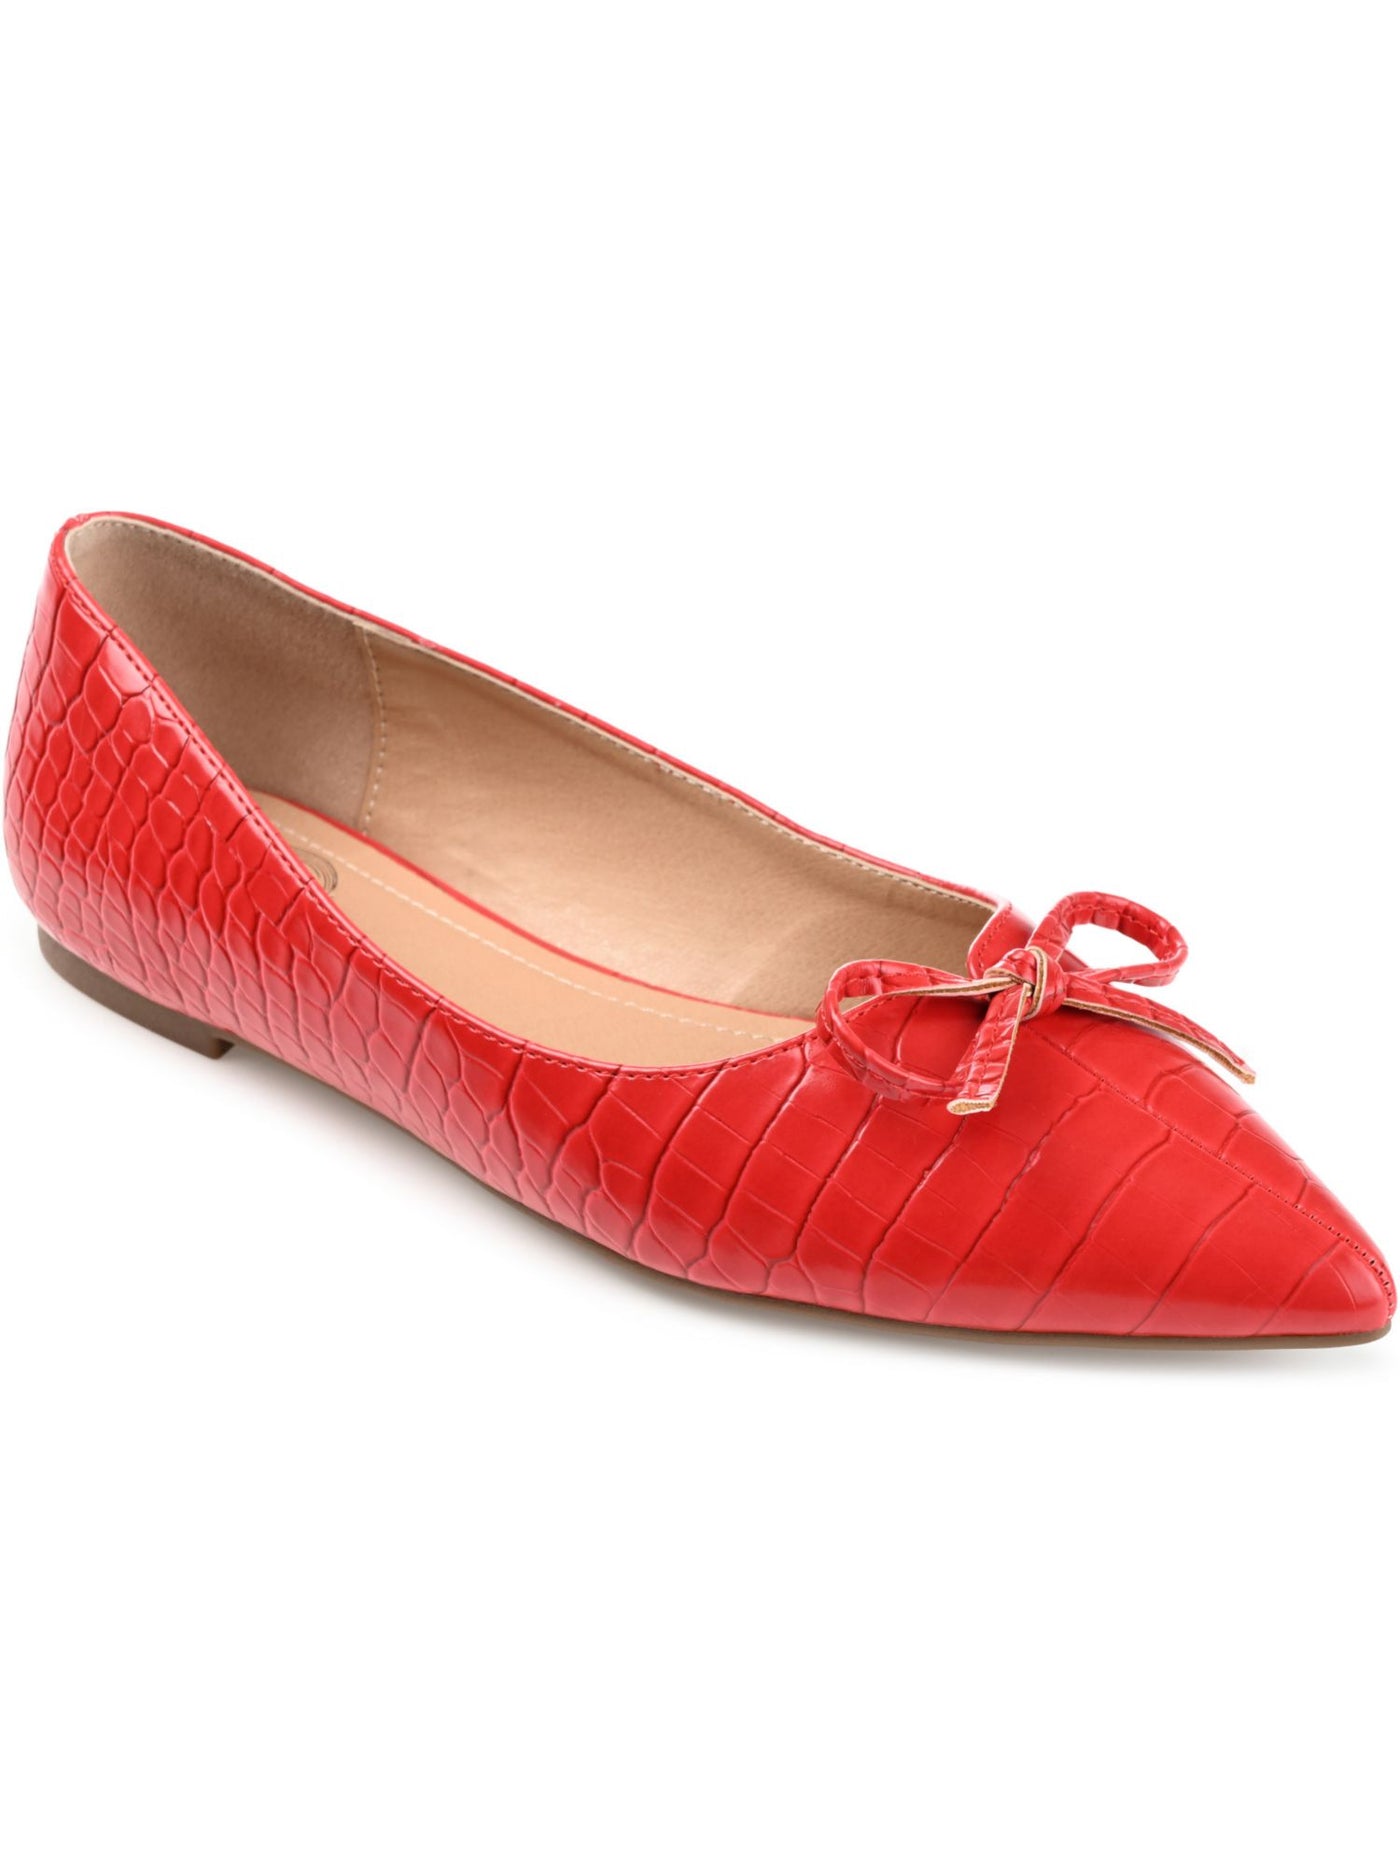 JOURNEE COLLECTION Womens Red Croc Embossed Bow Accent Padded Devalyn Pointed Toe Slip On Ballet Flats 12